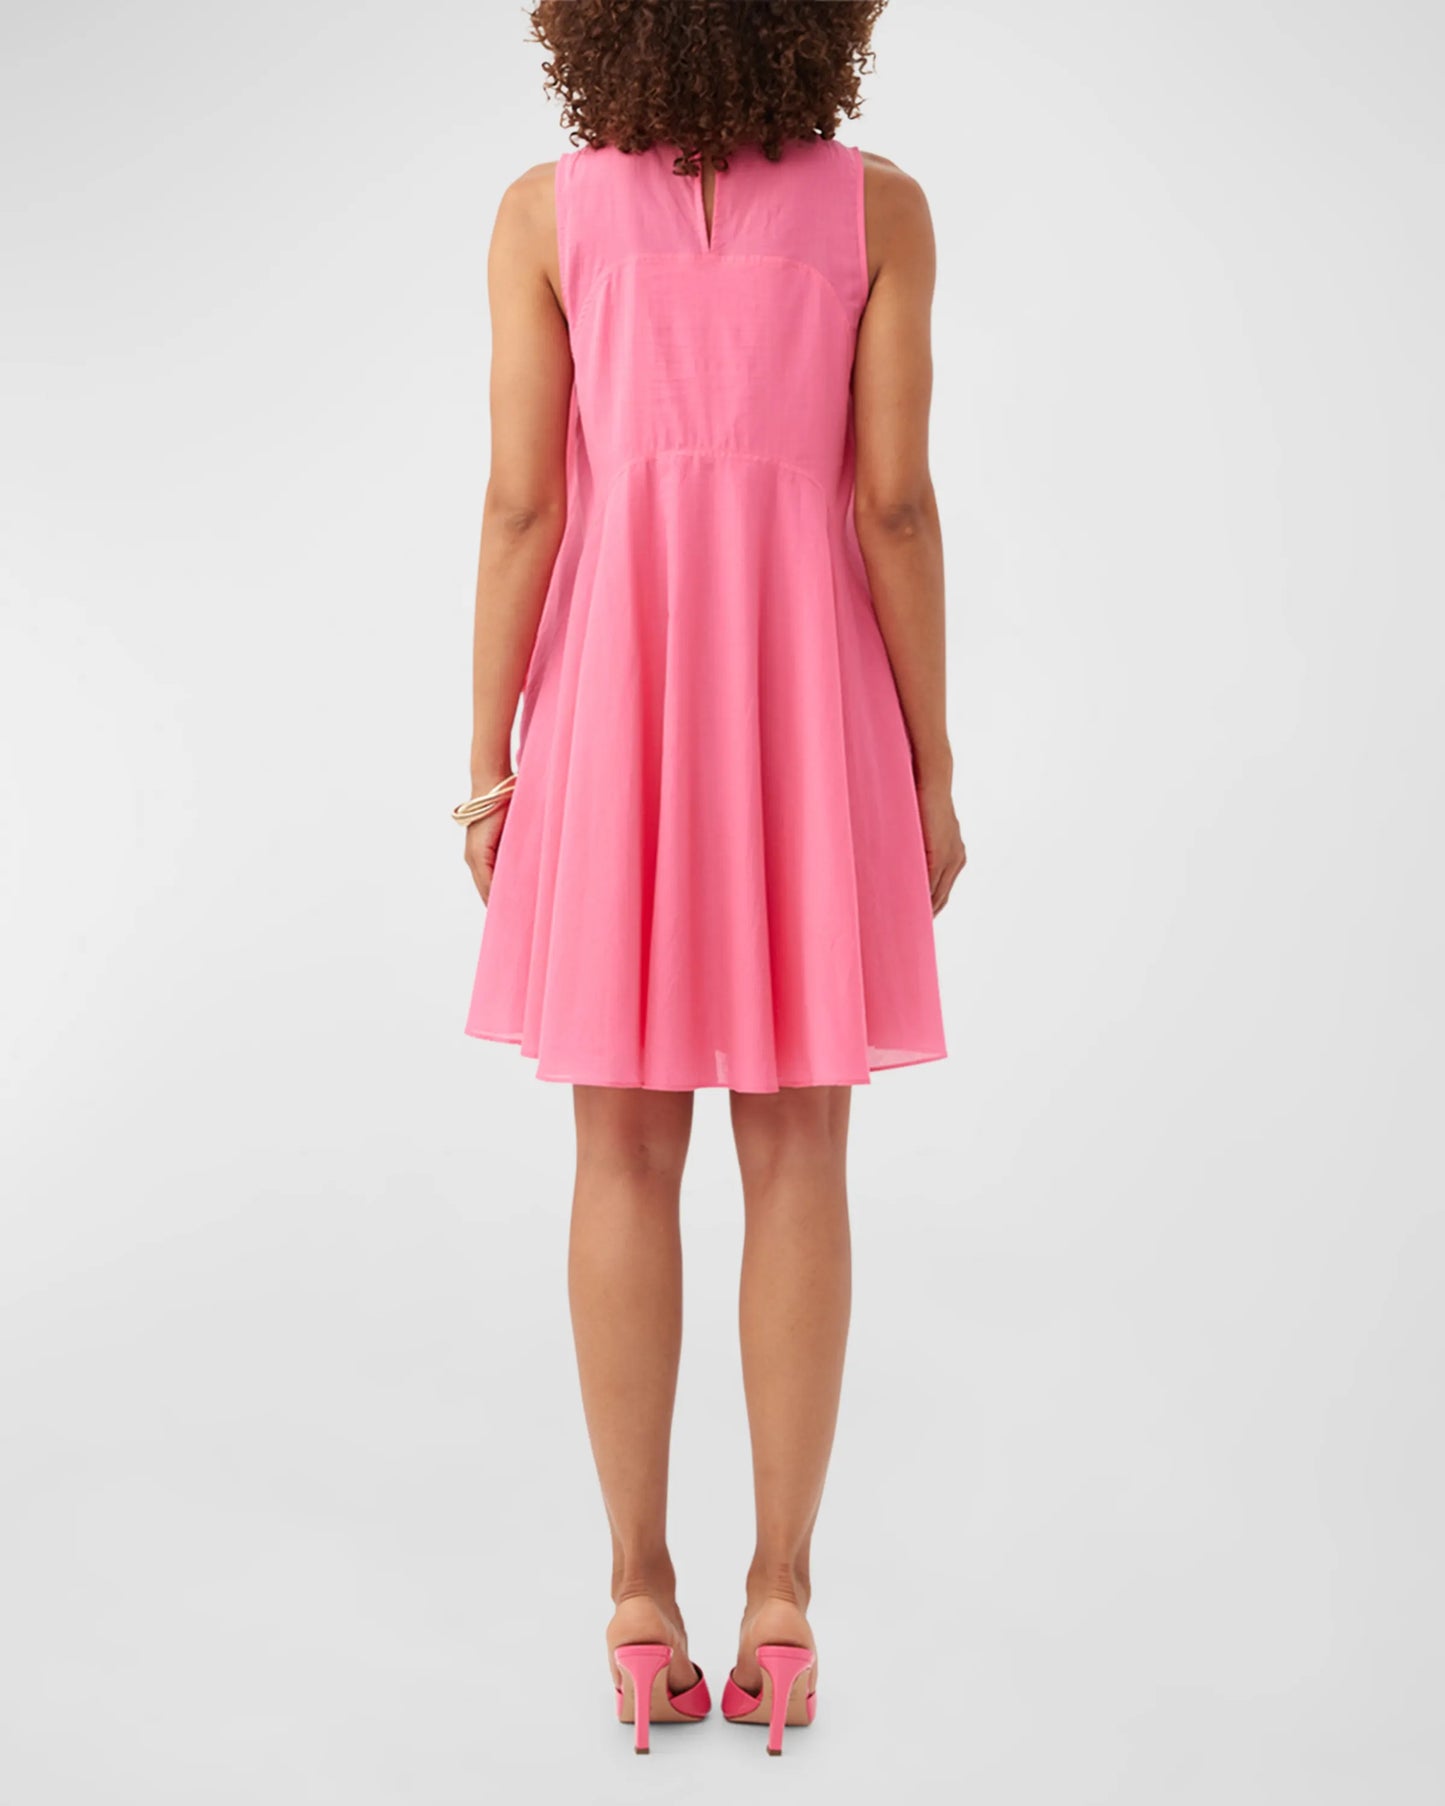 Mauvie Dress by Trina Turk in Pink Paradise